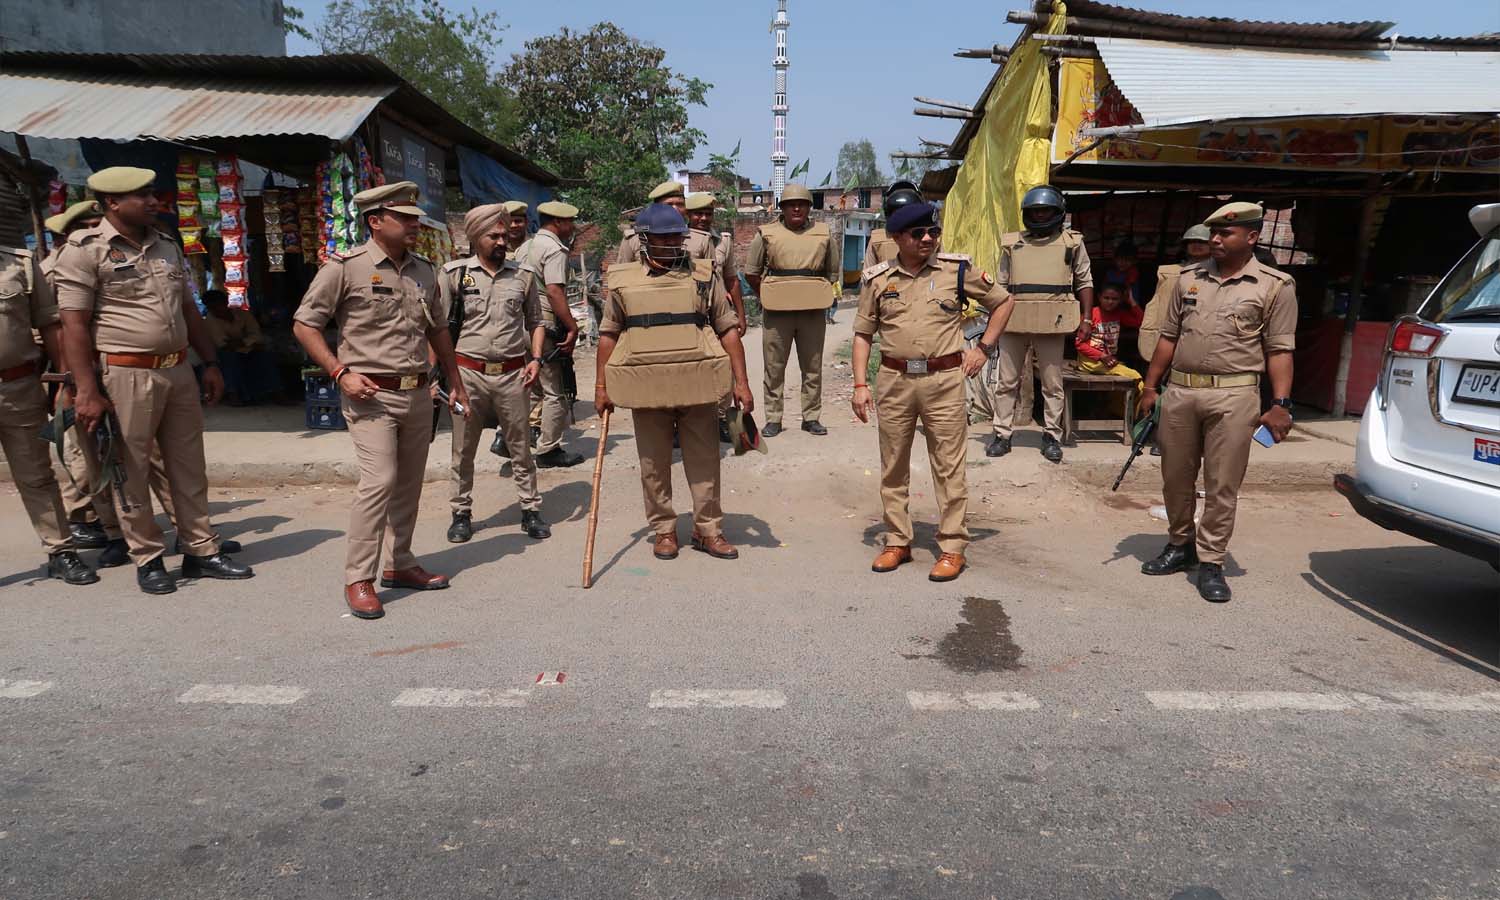 High alert in the district after the death of Mukhtar Ansari, police increased vigil during Friday prayers